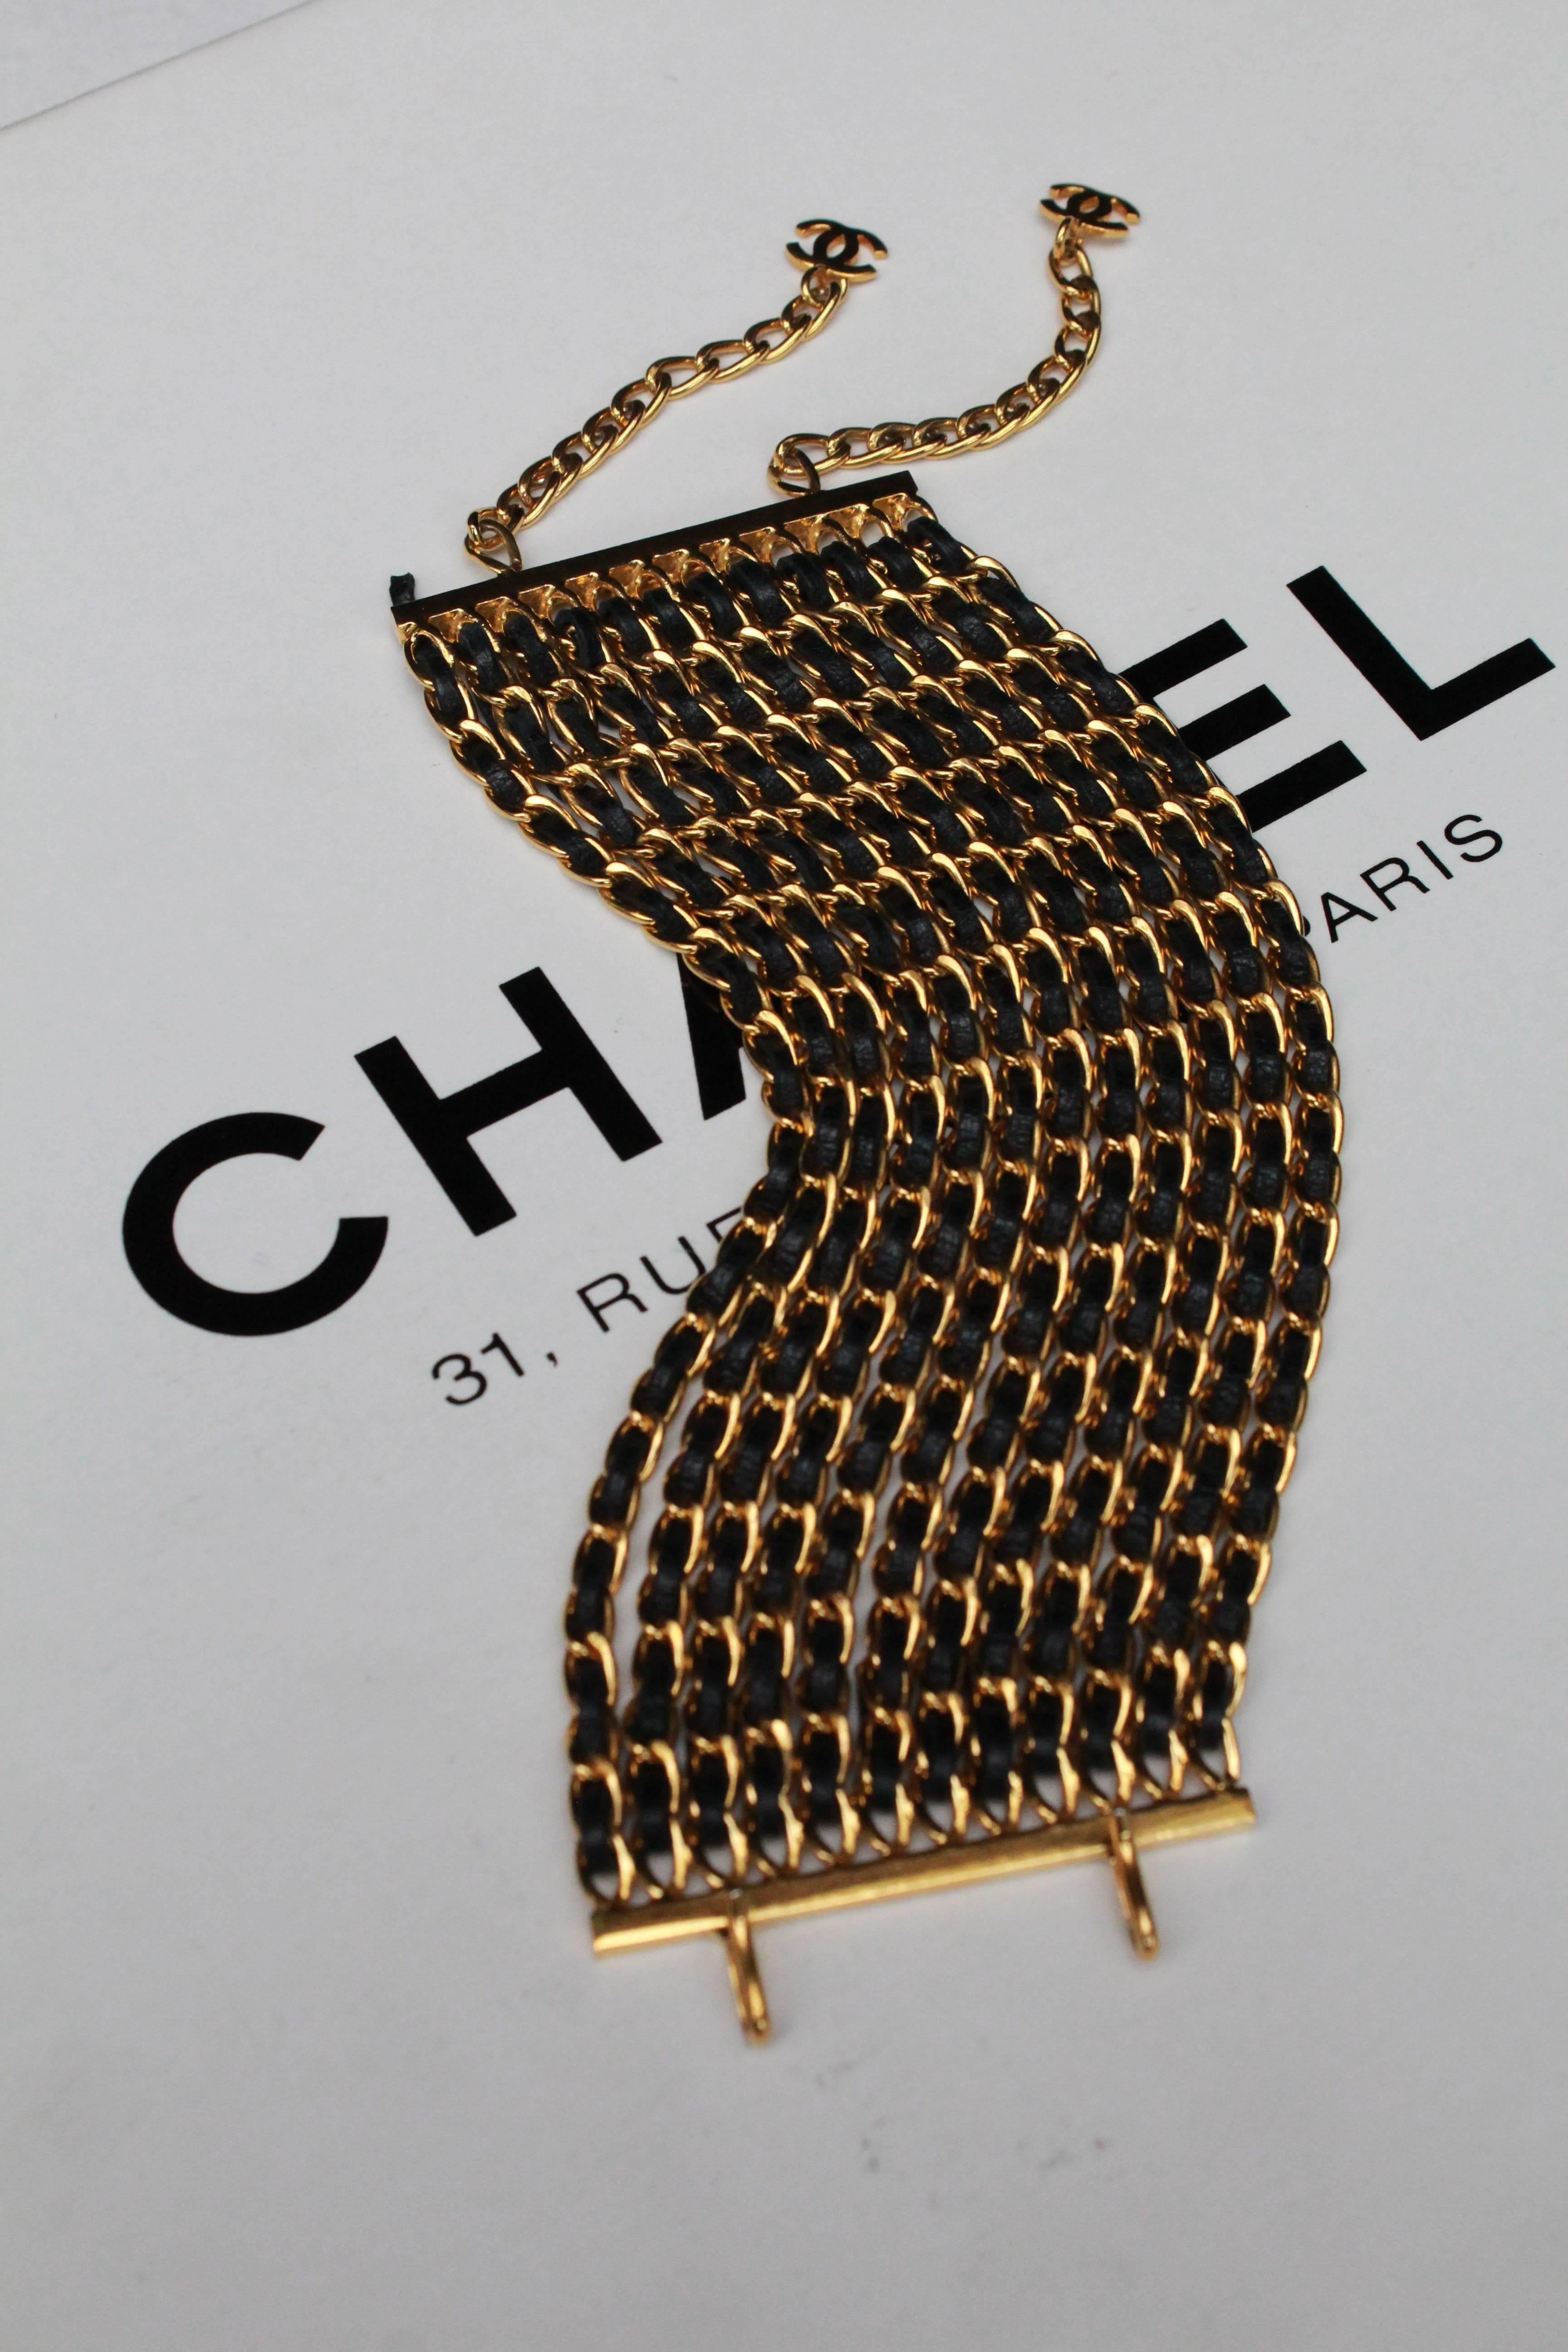 CHANEL (Made in France) Wide cuff bracelet comprised of twelve gilded metal chains. Each chain is interwoven with a black leather cord, using the same techniques and materials as the iconic Chanel handbag. The bracelet can be adjusted by two gilded